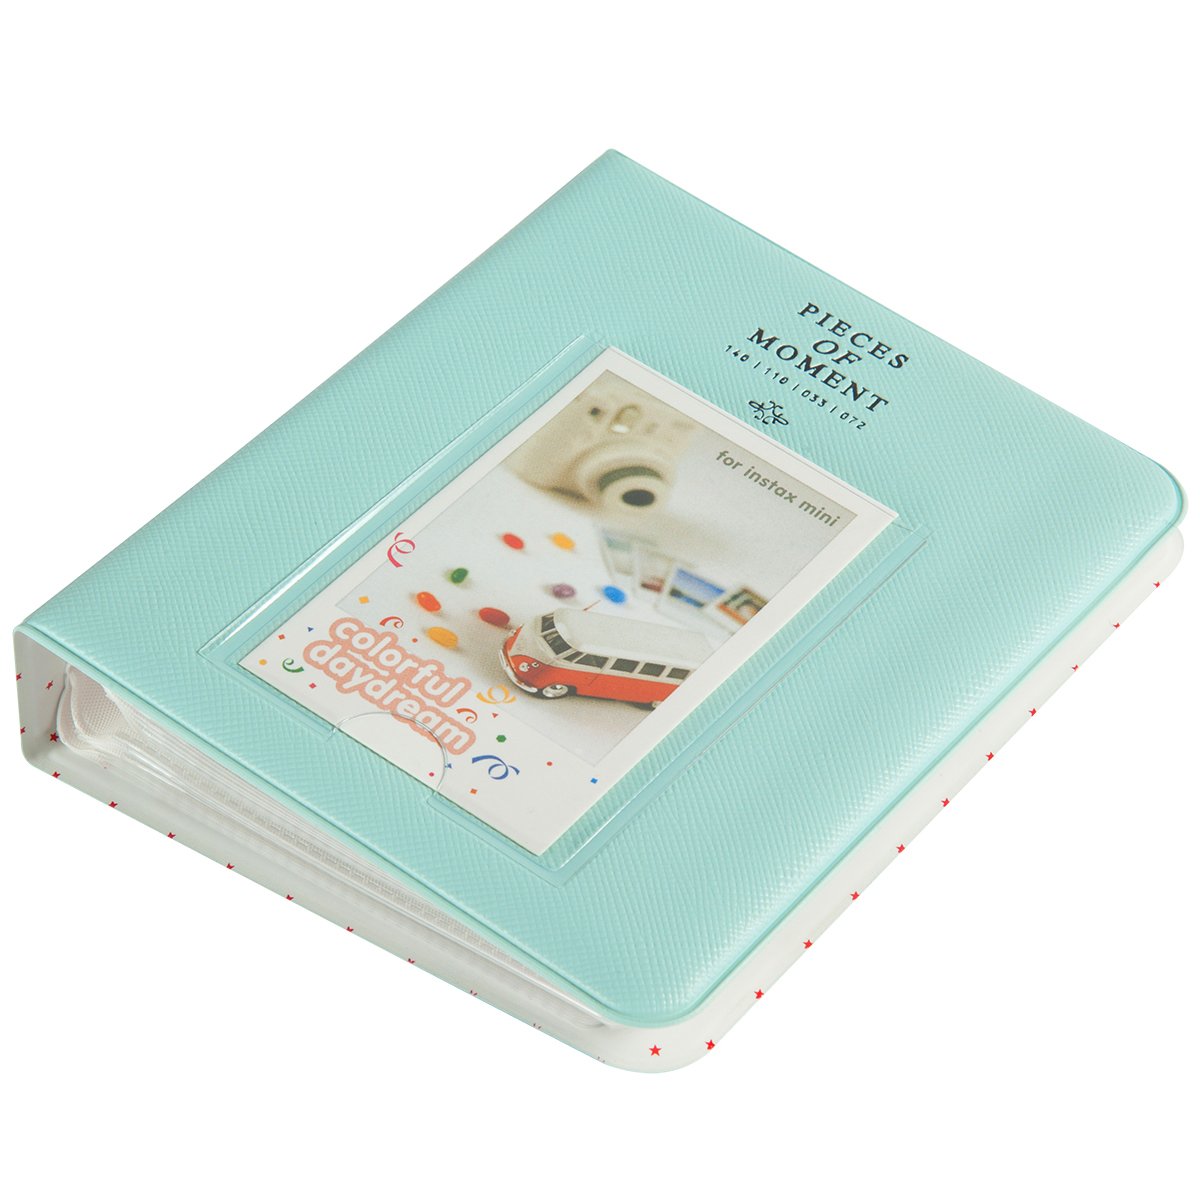 Fujifilm Instax Mini 10X1 blue marble Instant Film with Instax Time Photo Album 64 Sheets (ice blue)